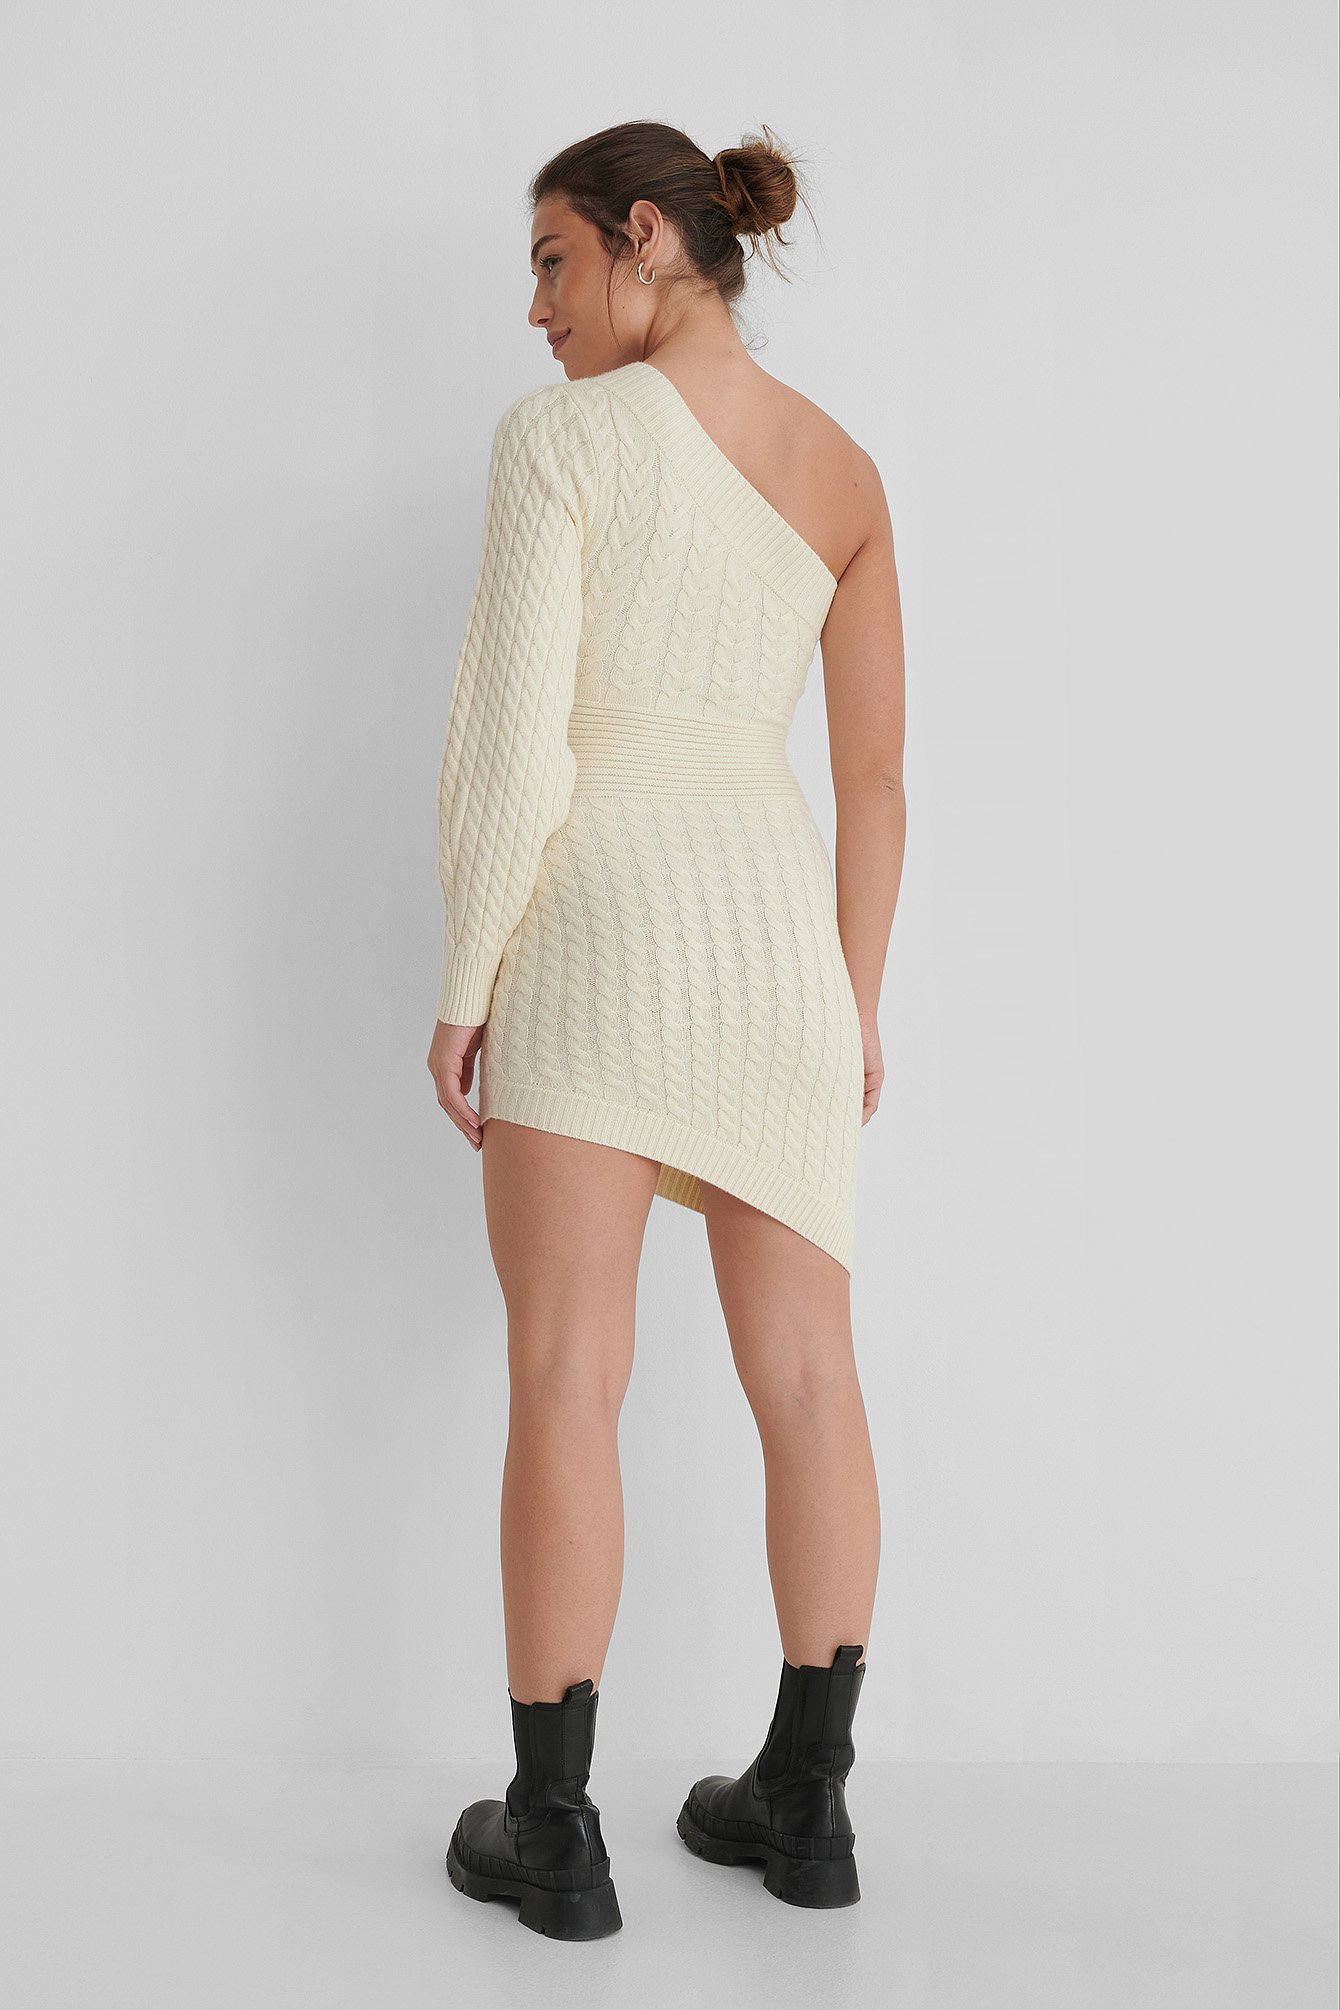 Offwhite Knitted Asymmetric Dress